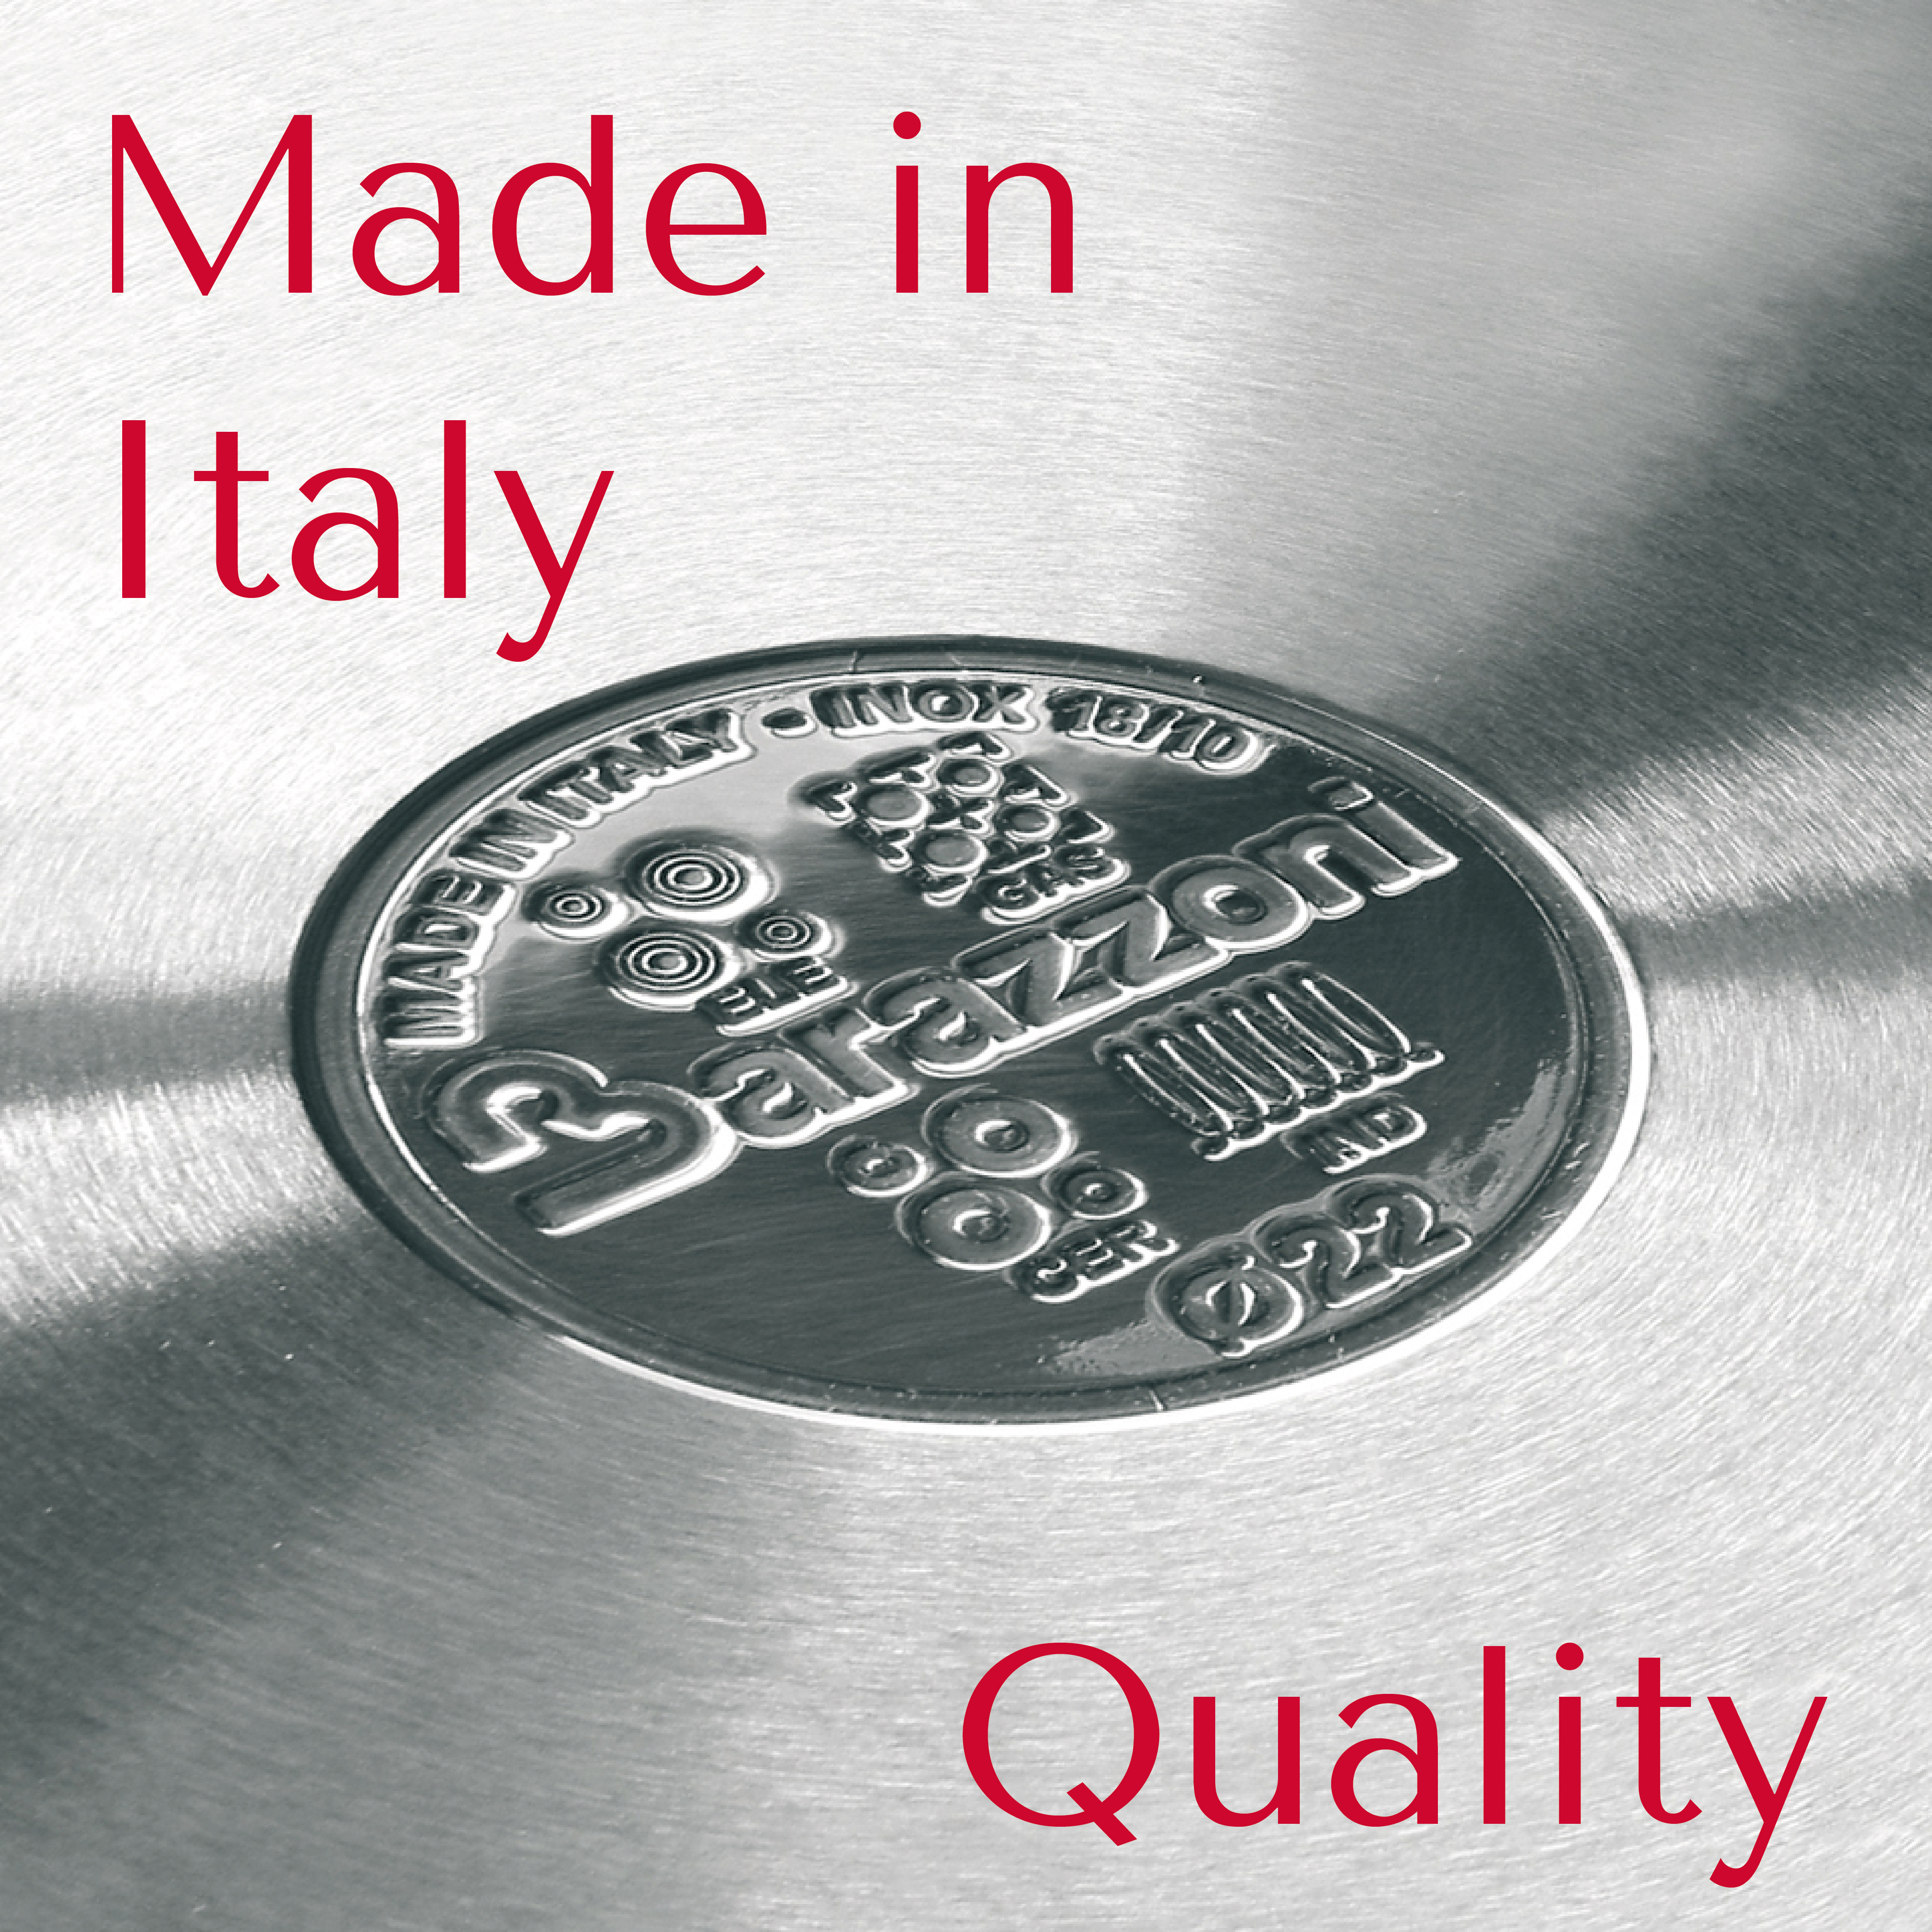 Made in Italy quality.jpg